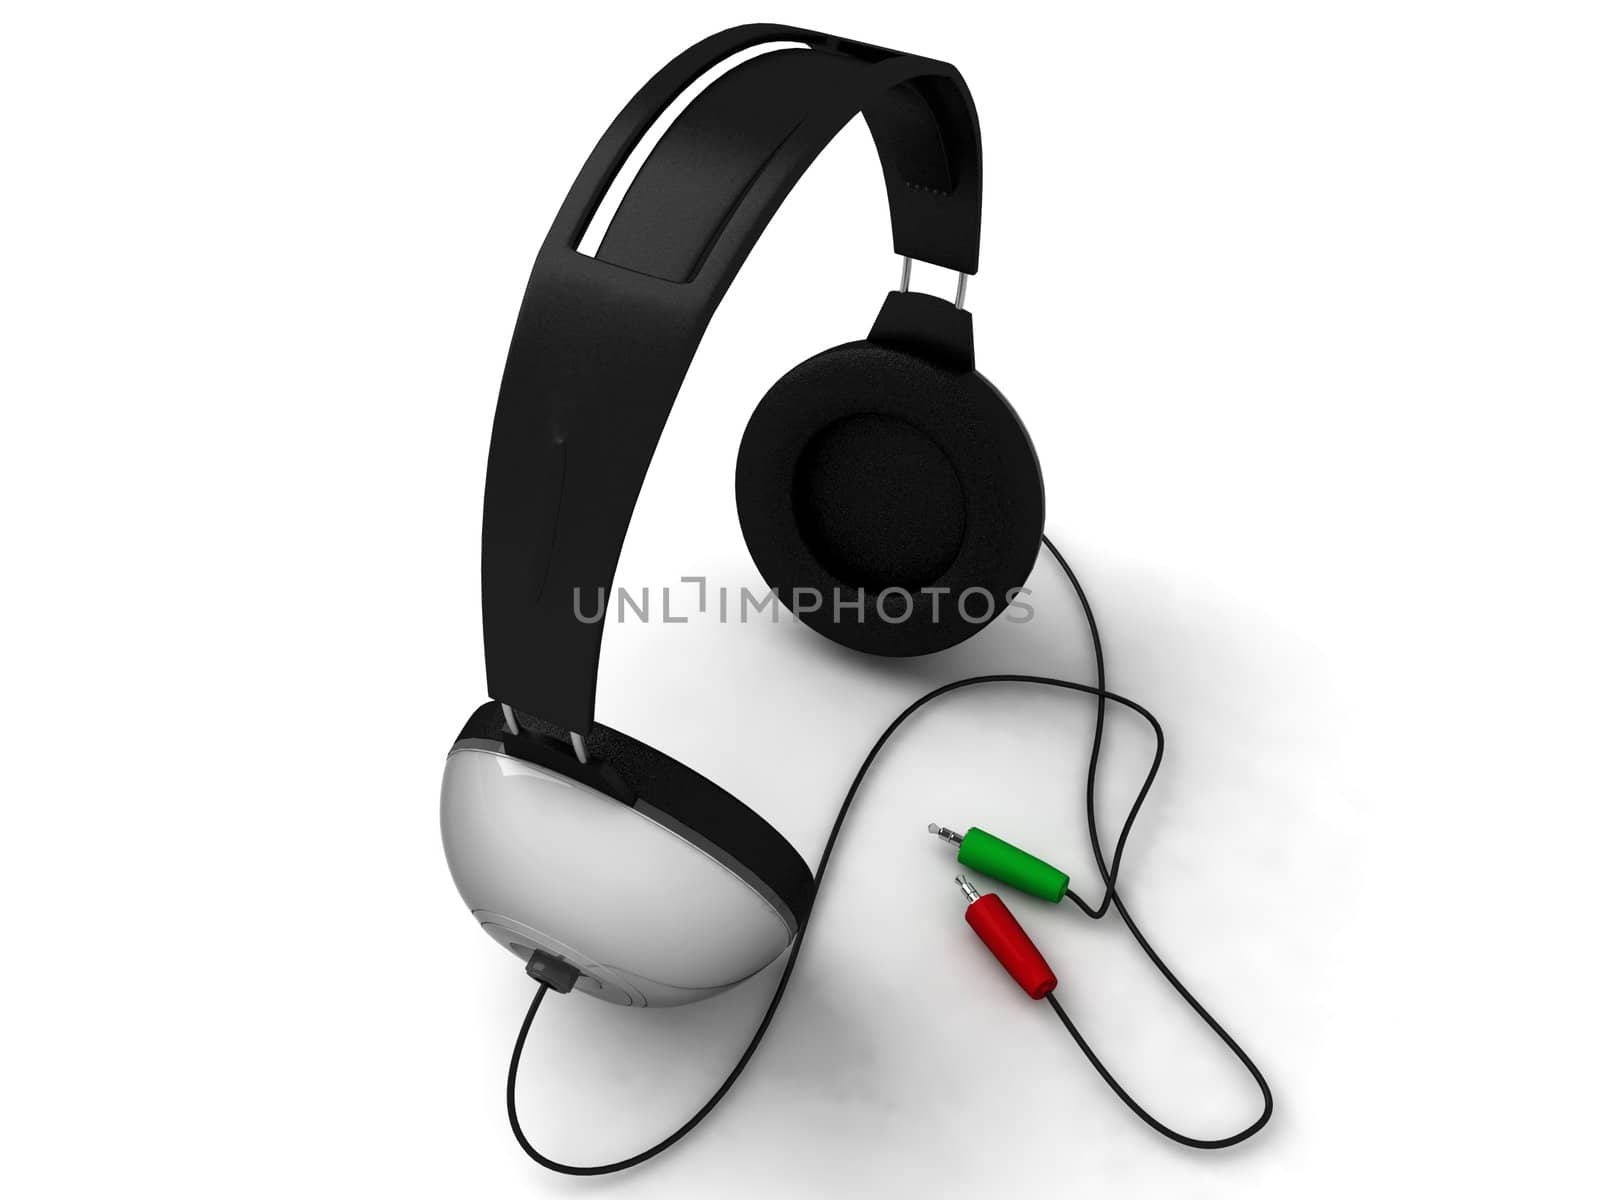 three dimensional headset on an isolated background